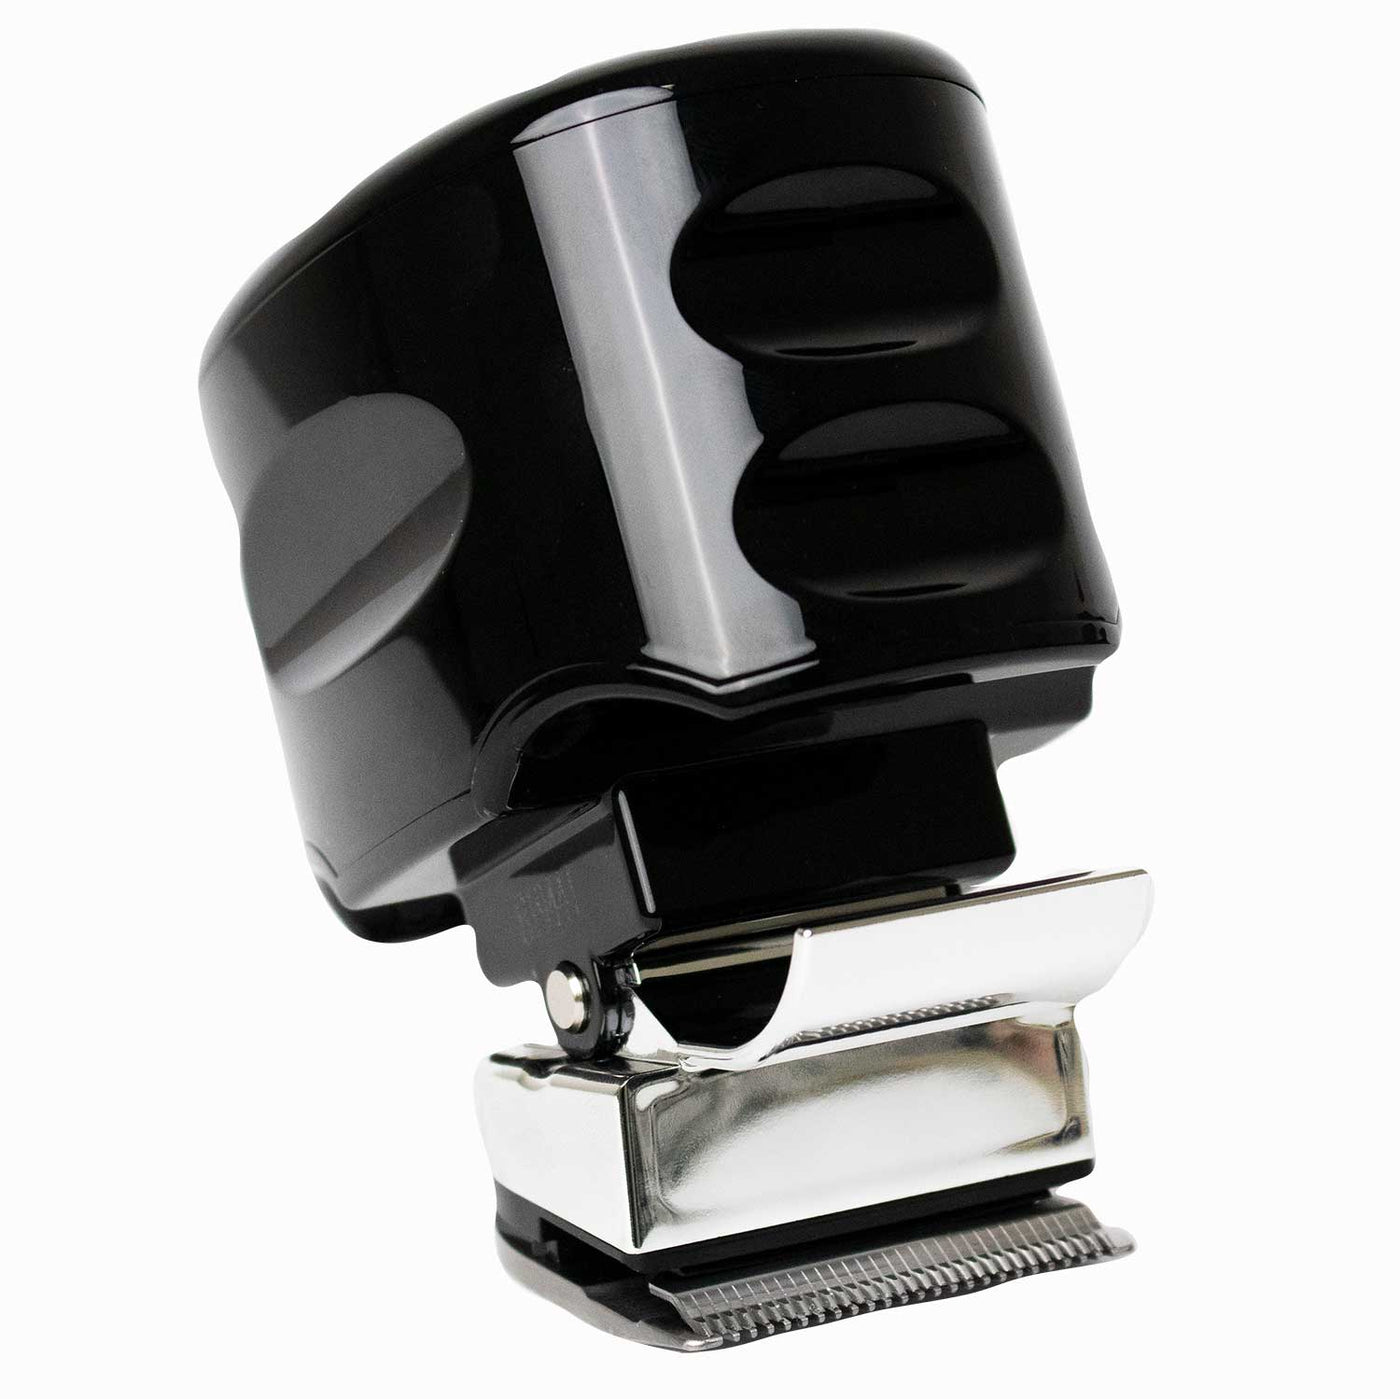 The Beast Clipper PRO has several recesses located around the body of the shaver. The front and back of the shaver each have two recesses designed to make the clipper easy to hold in several positions.